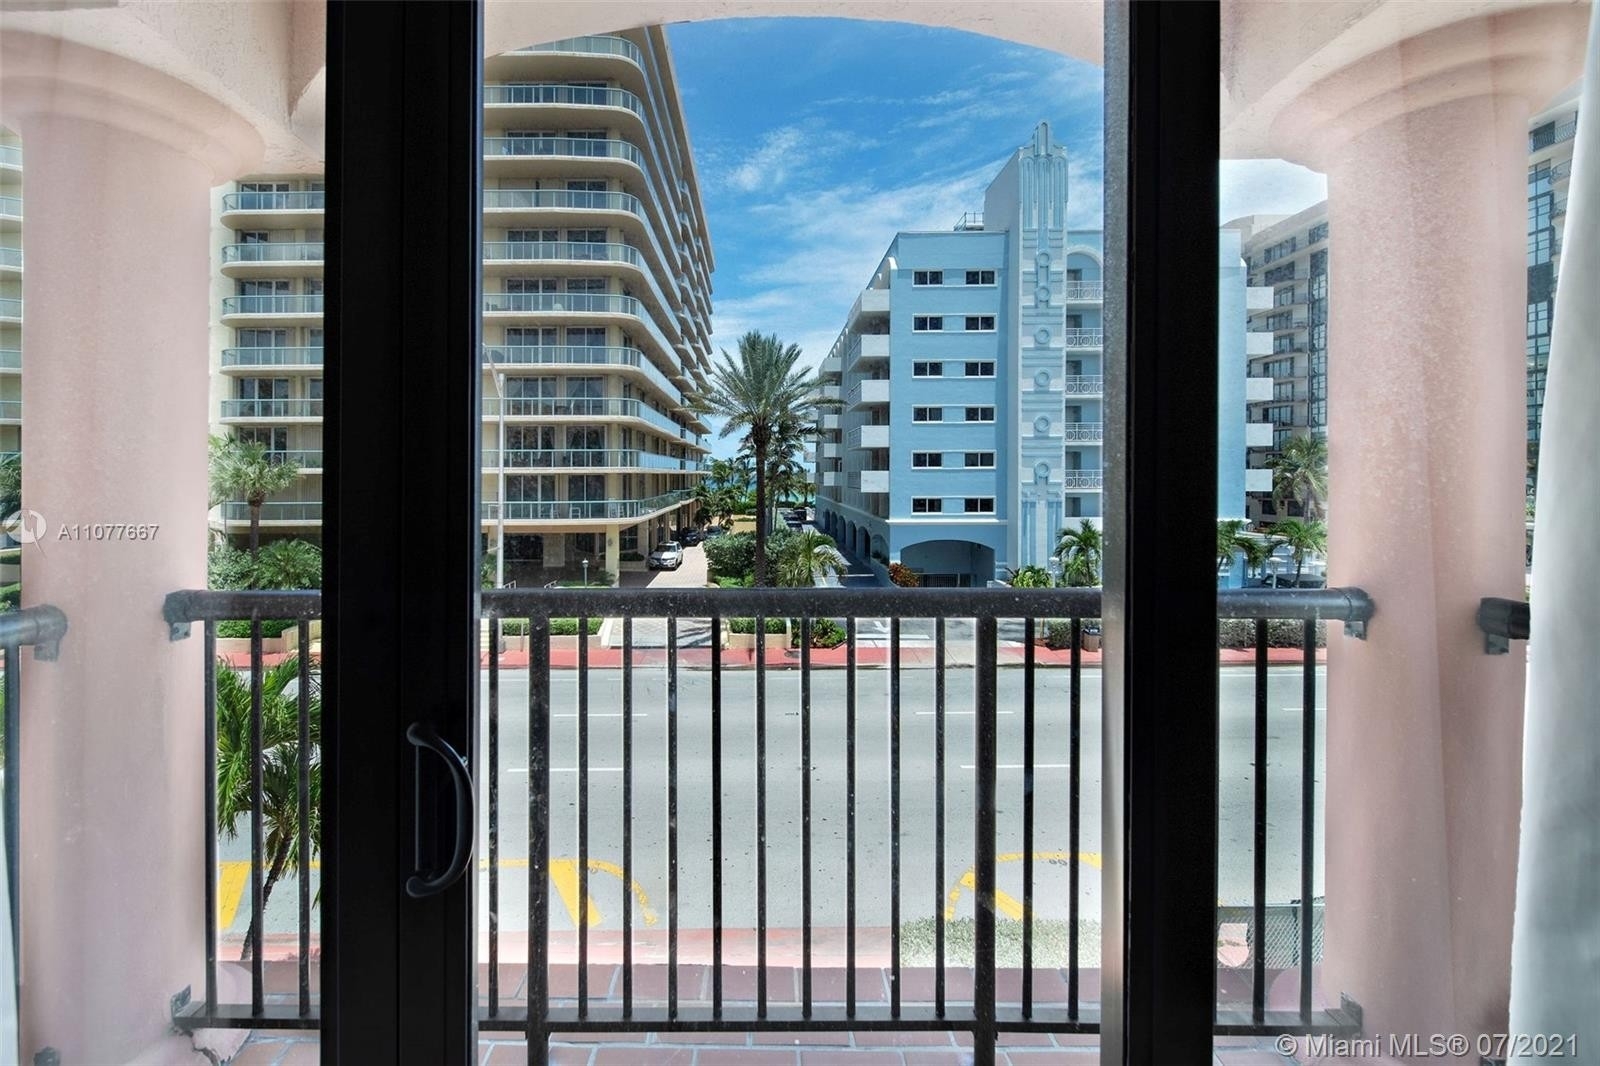 12. Condominiums at 8816 Collins Ave , 203 Surfside